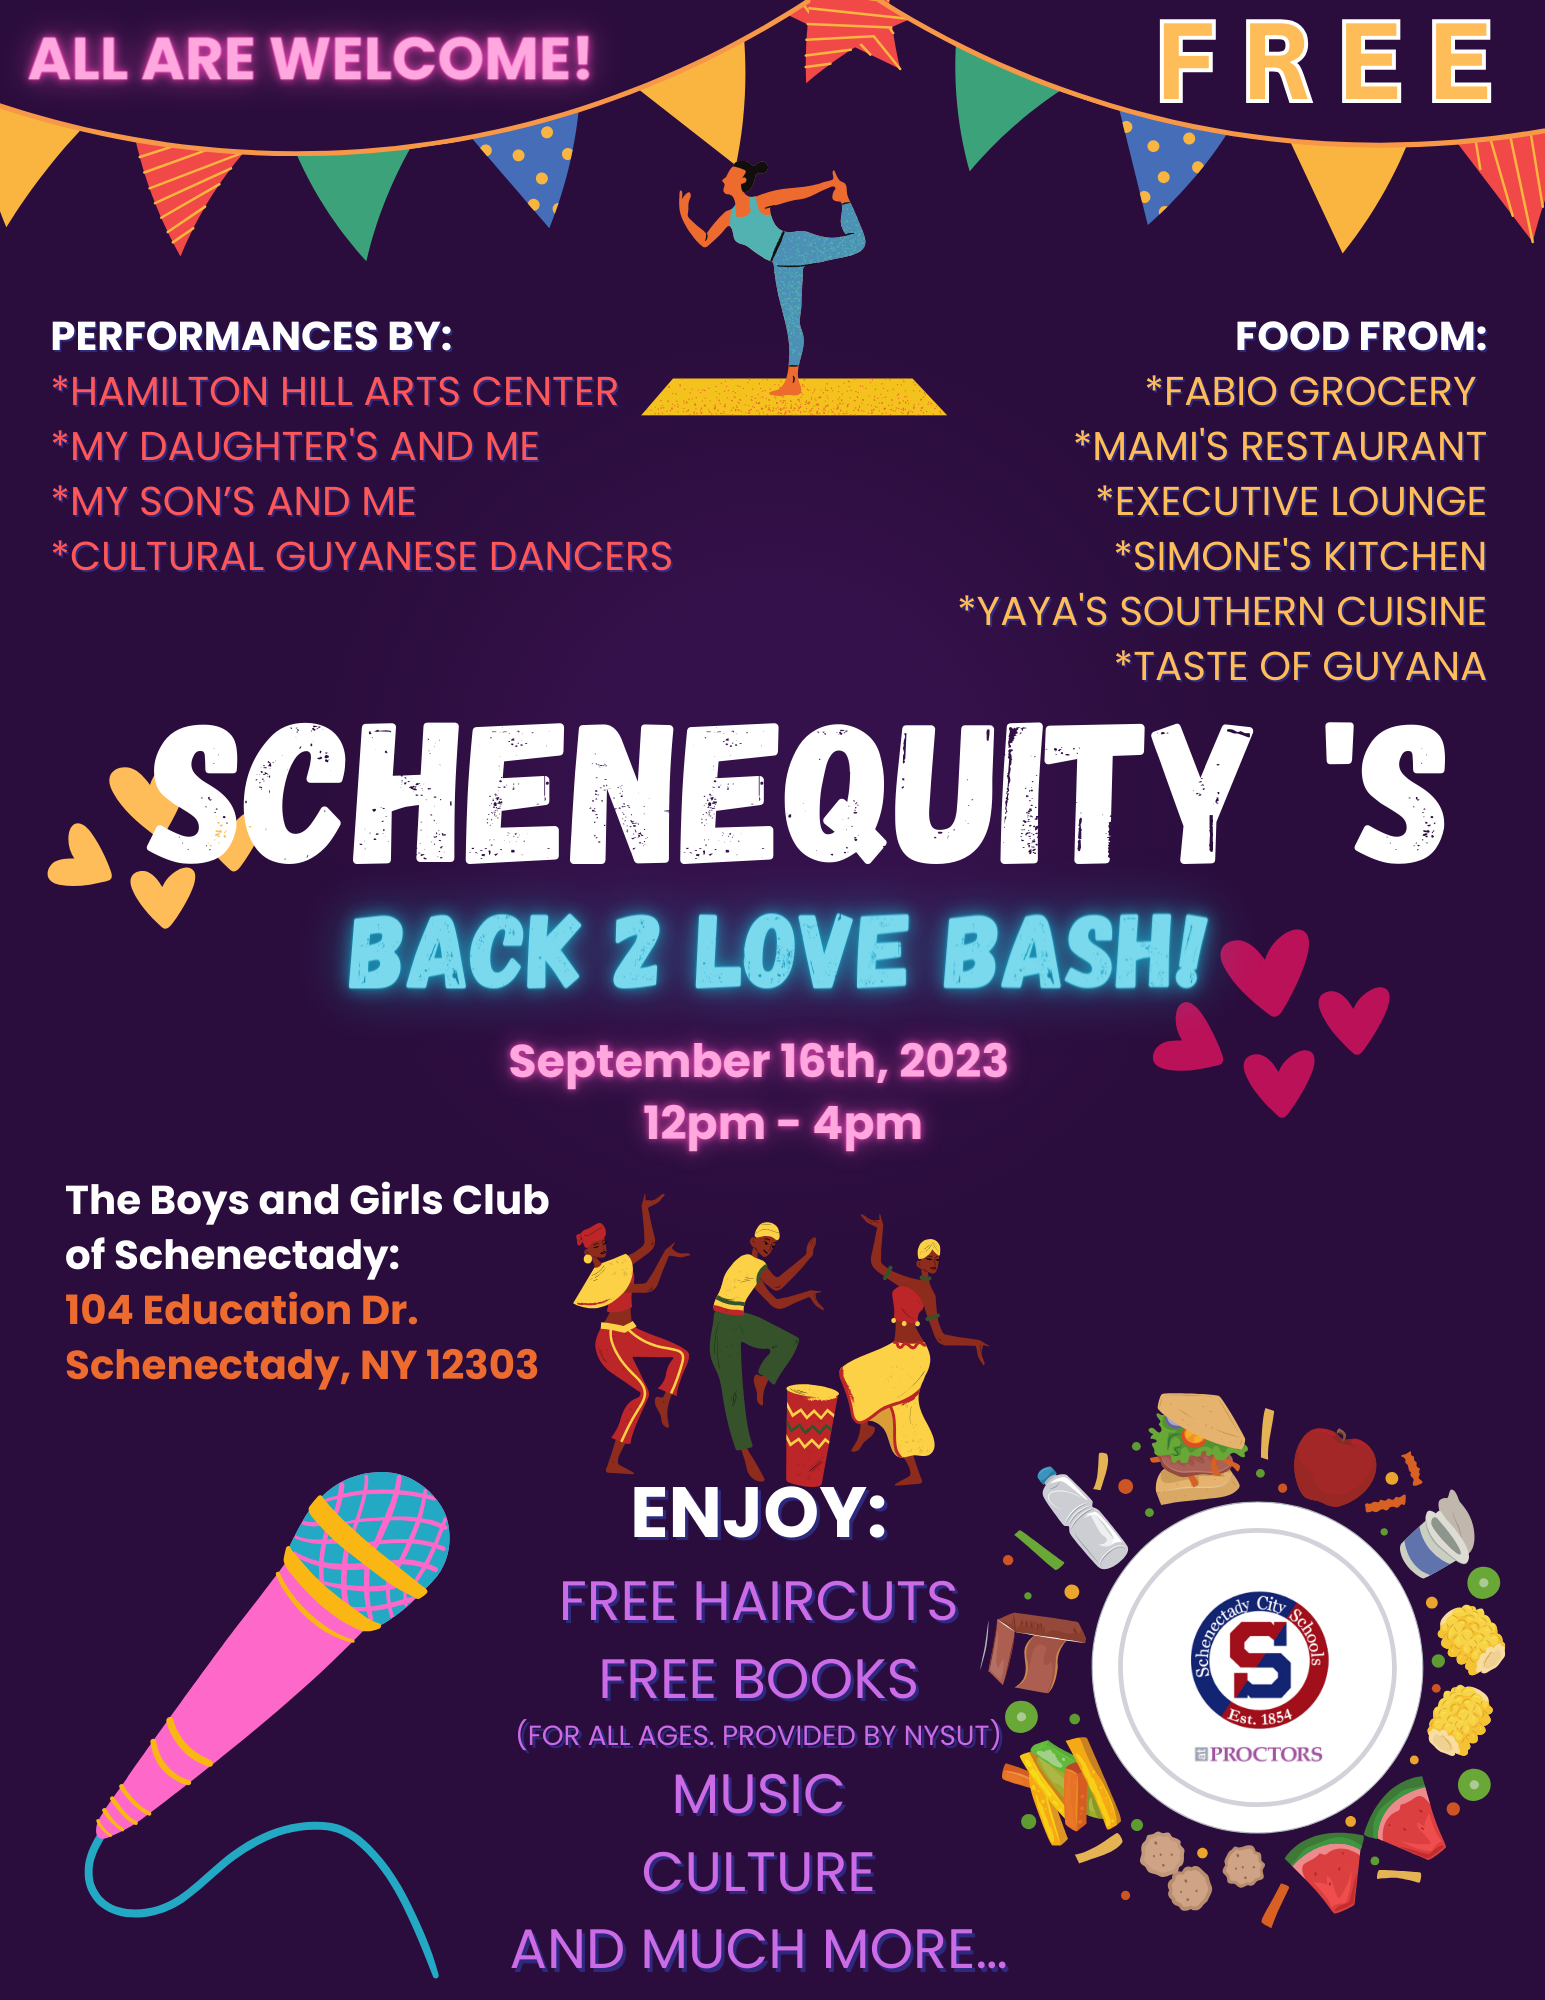 Schenequity's Back to Love Bash Flyer in English